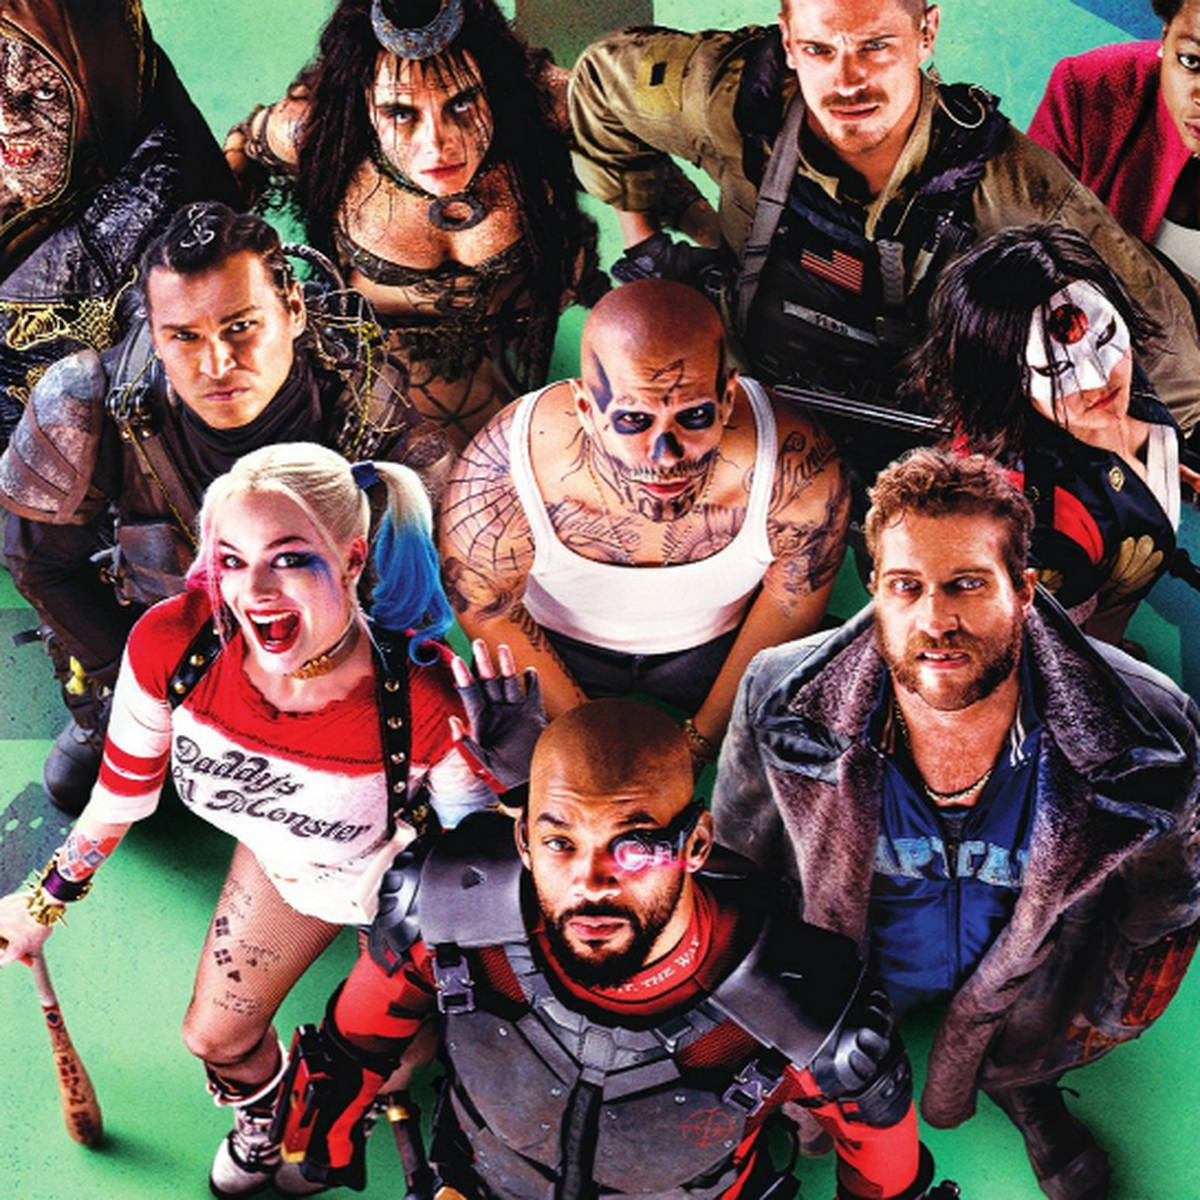 Suicide Squad 2': Cast, Release Date, Plot And Everything We Know